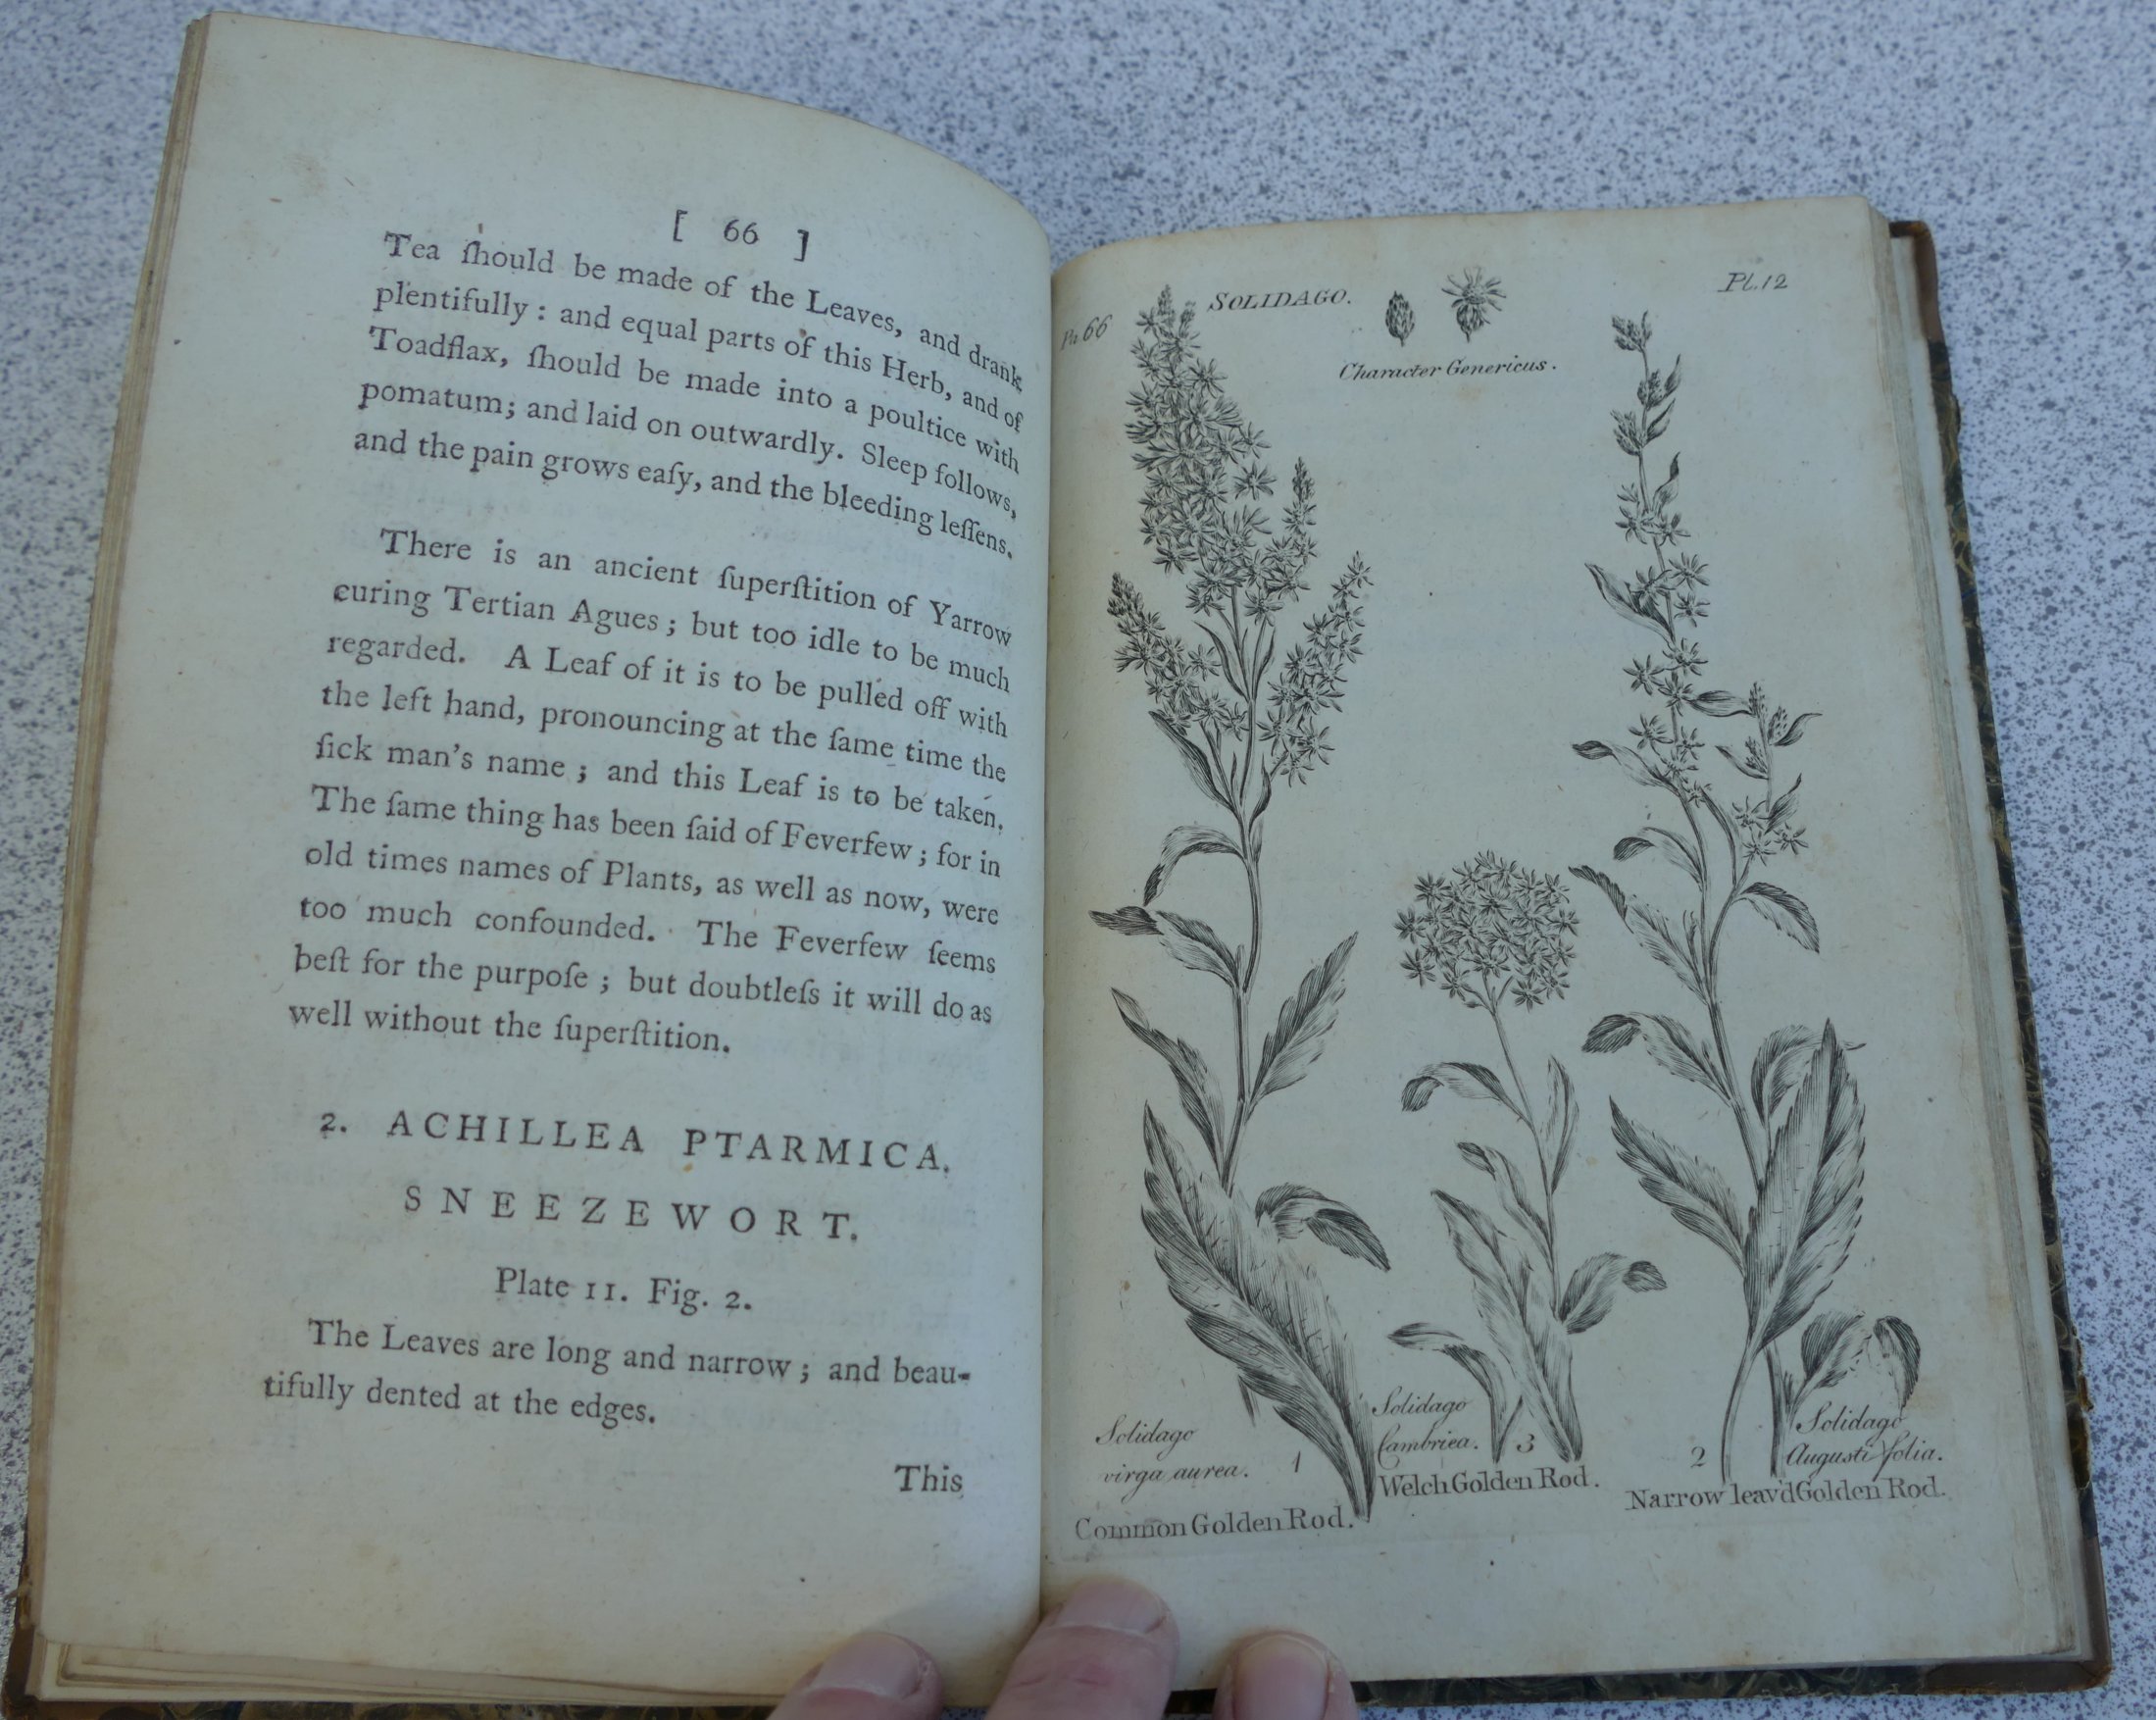 HILL John Sir, Virtues of British Herbs, London 1771, 4th edition with additions, Parts 1 and II, - Image 6 of 7